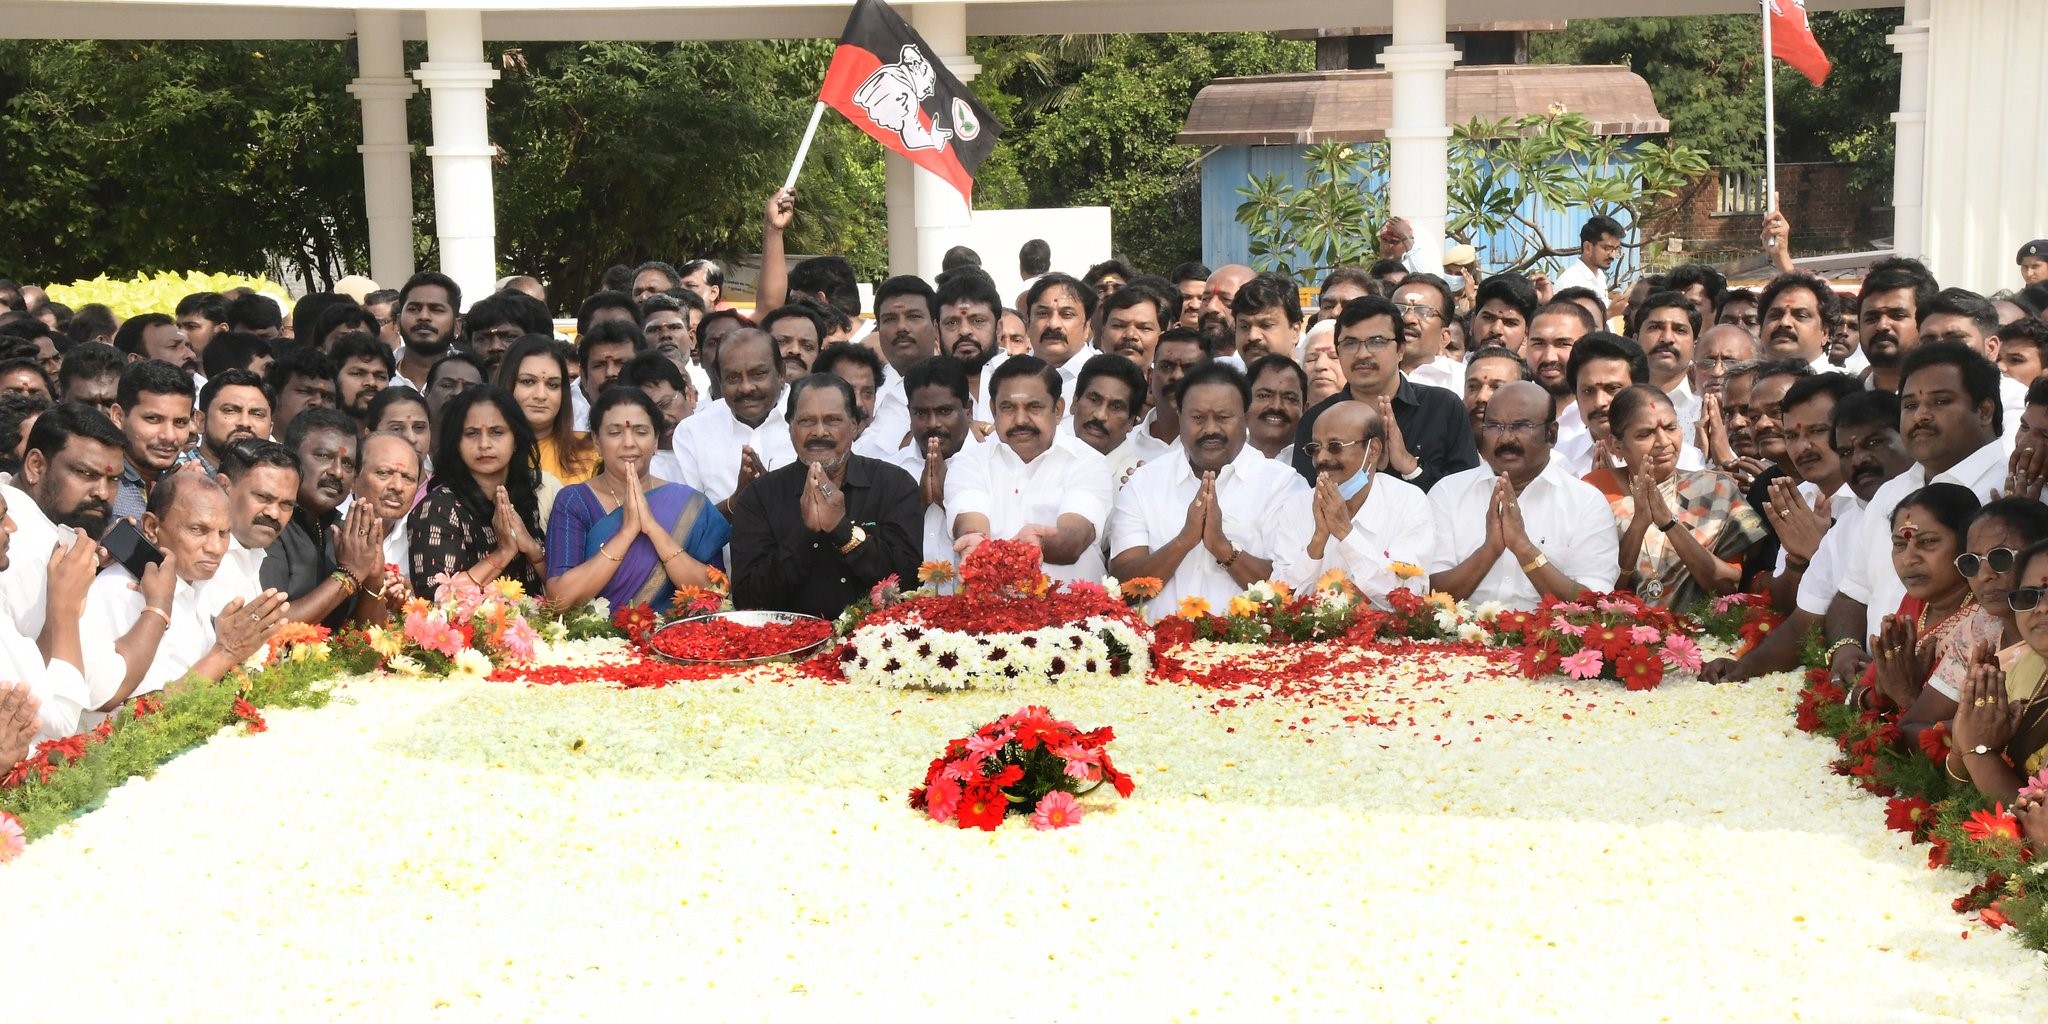 AIADMK members including EPS at the Anna Memorial in Chennai. (AIADMKOfficial/Twitter)